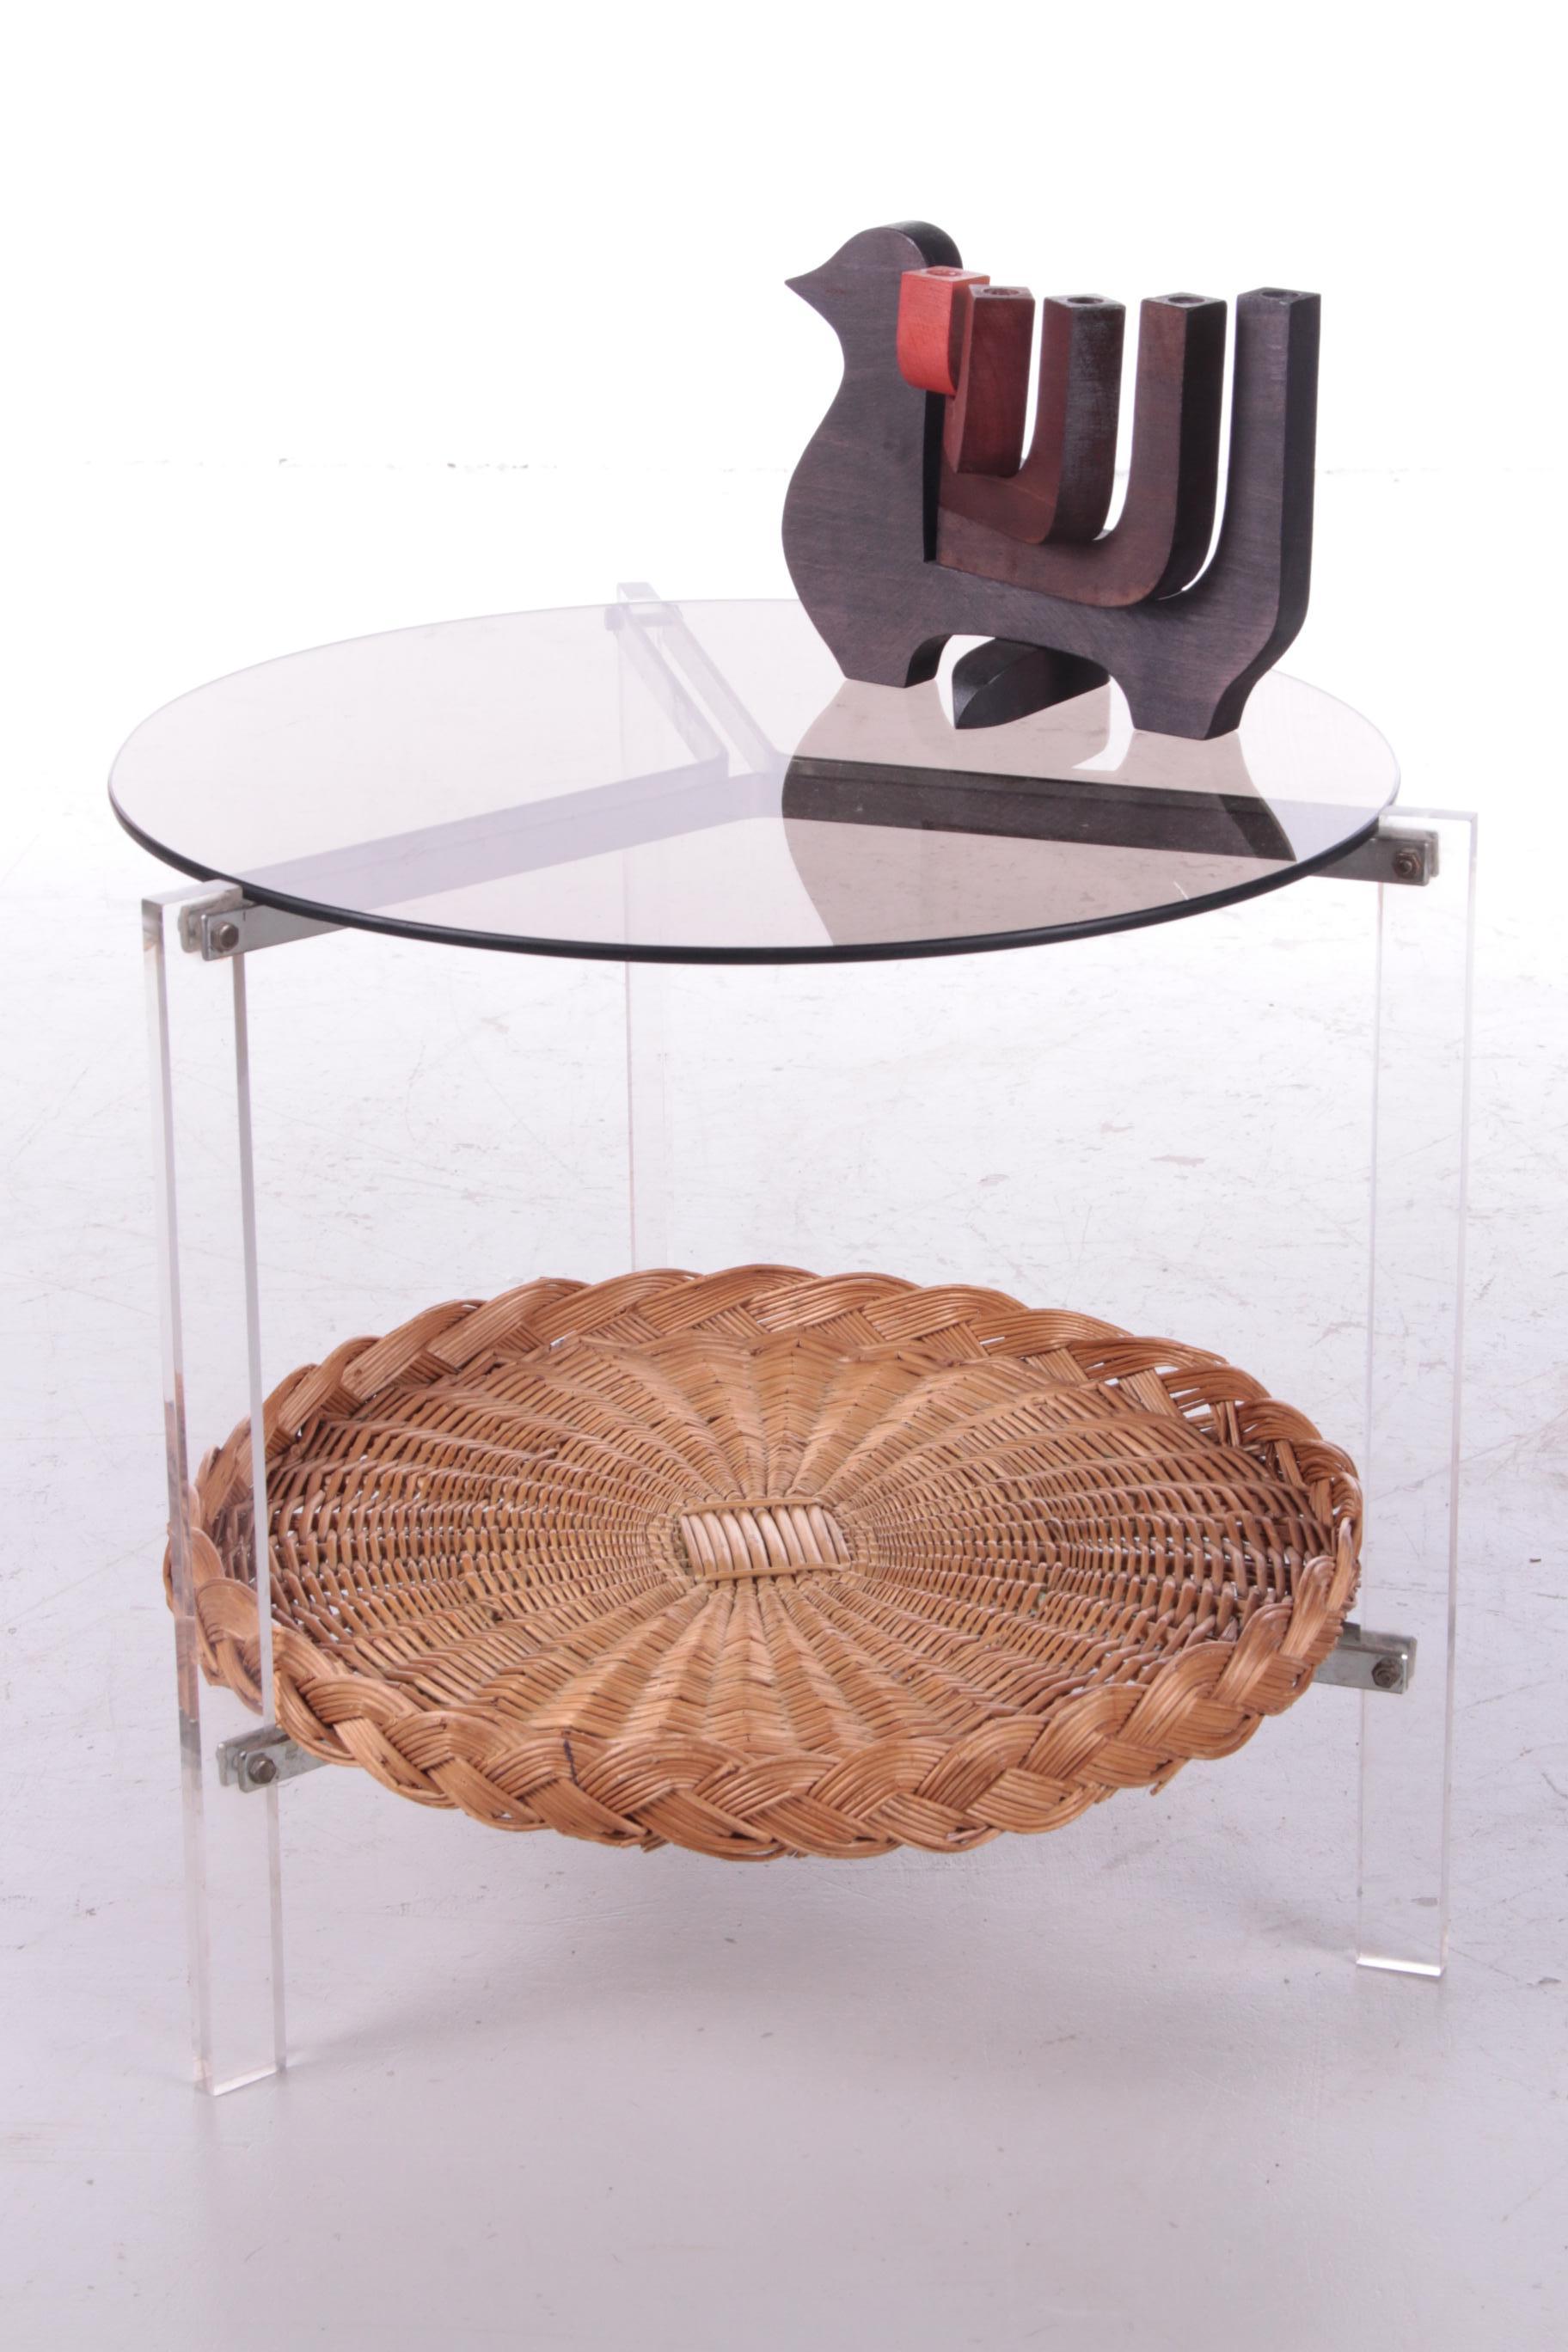 Vintage glass side table with rattan magazine rack, 1960s


A stylish German side table with handy magazine rack from the 1960s.

This beautiful table has a frame and table top made of glass, with additional metal support for the table top. At